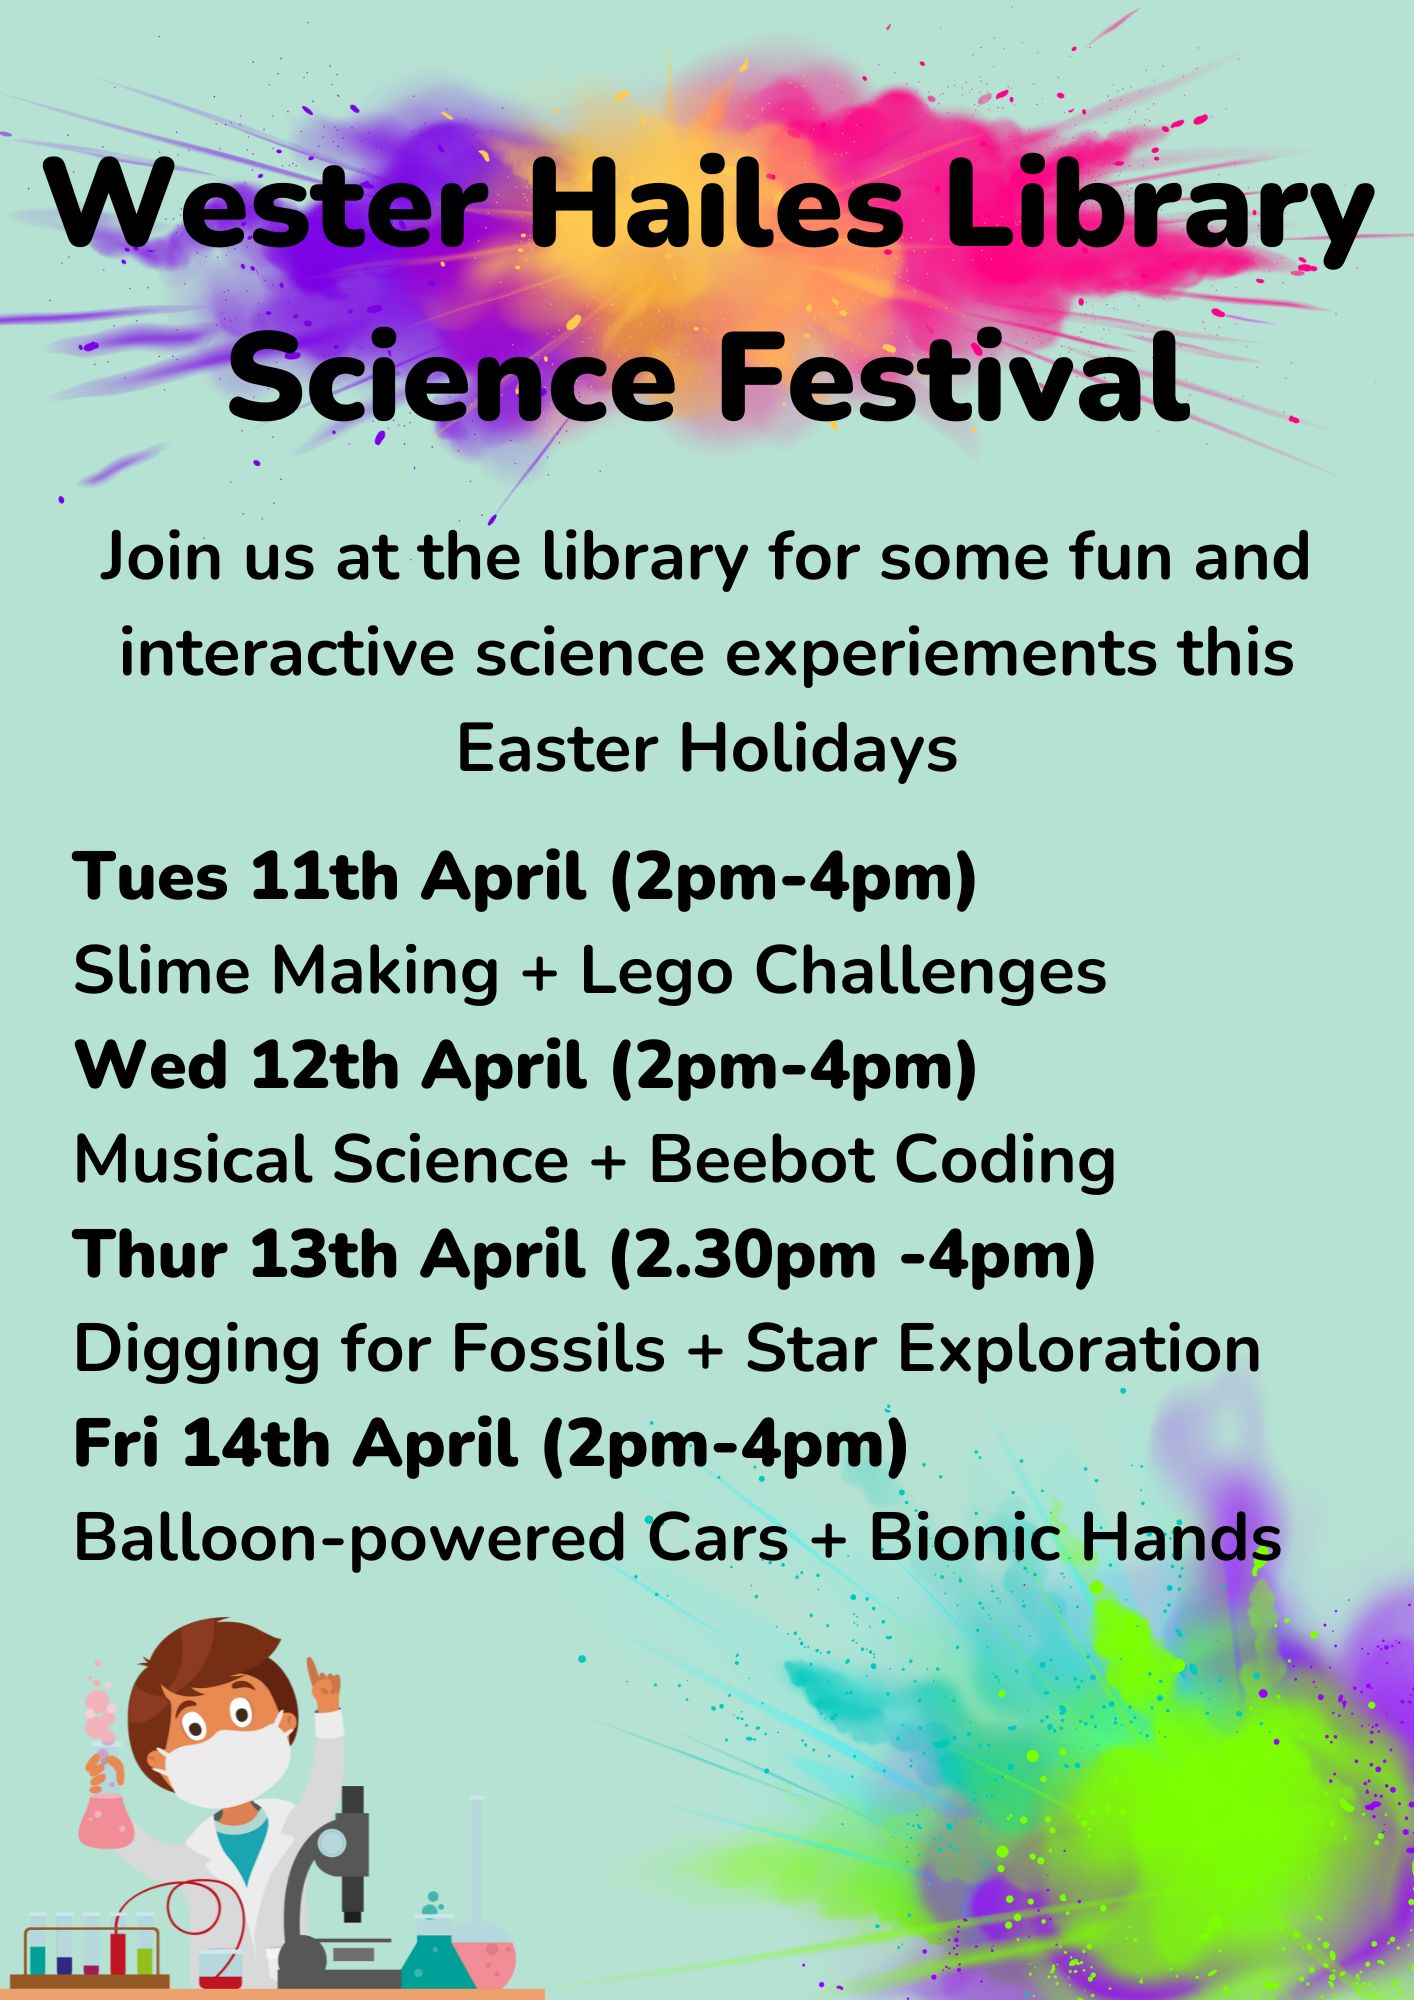 Wester Hailes Library Science Festival